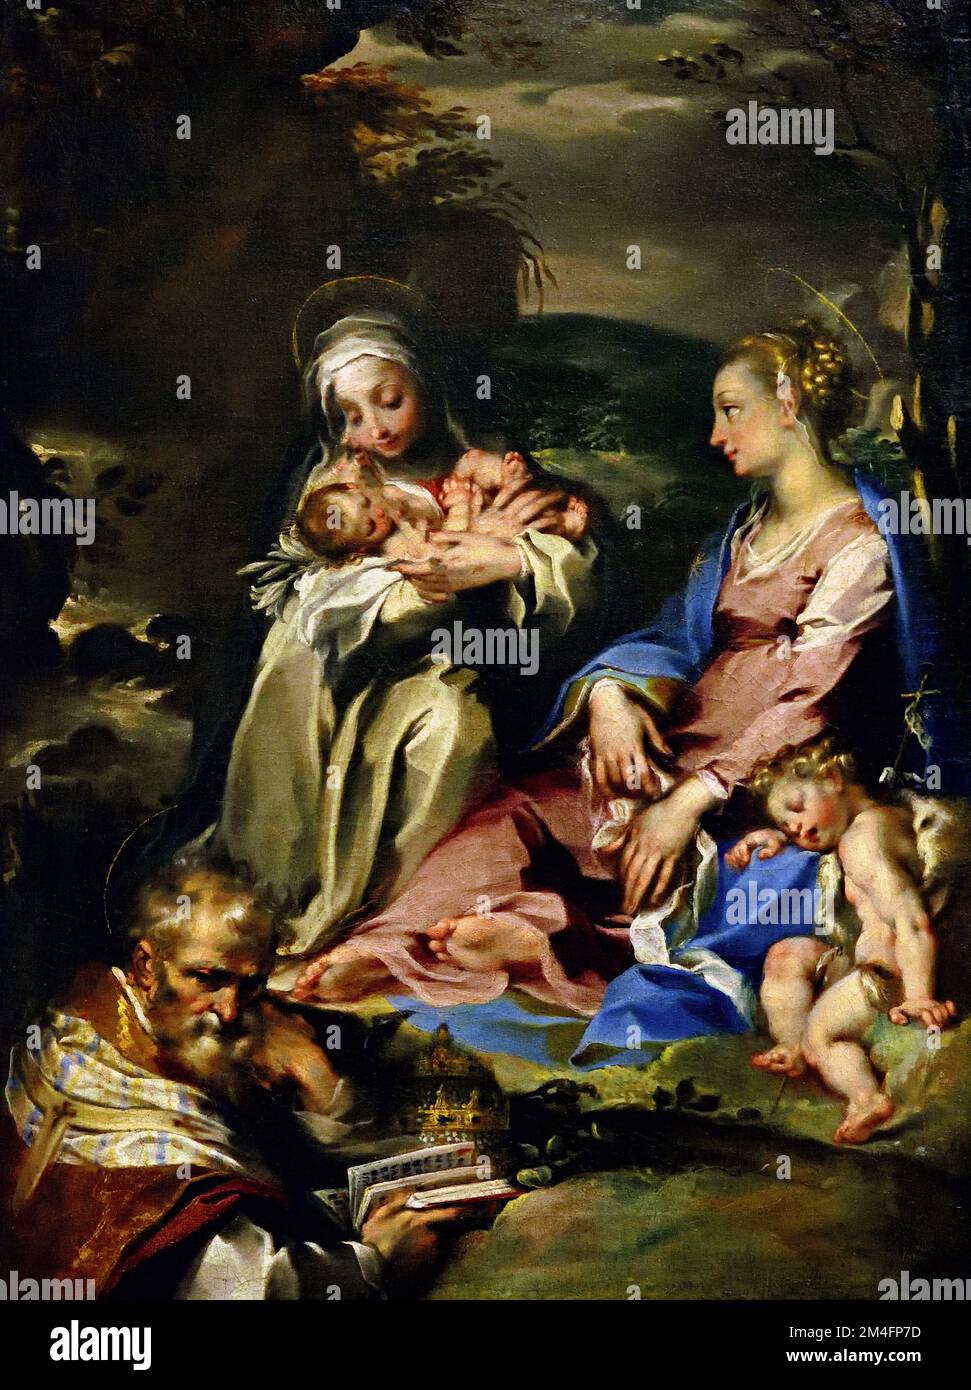 St Catherine of Siena with Child, Madonna and St John appearing to St Clement Roman Pope by Francesco Vanni 1564-1610  by Christian Art, Italy, Italian. Stock Photo